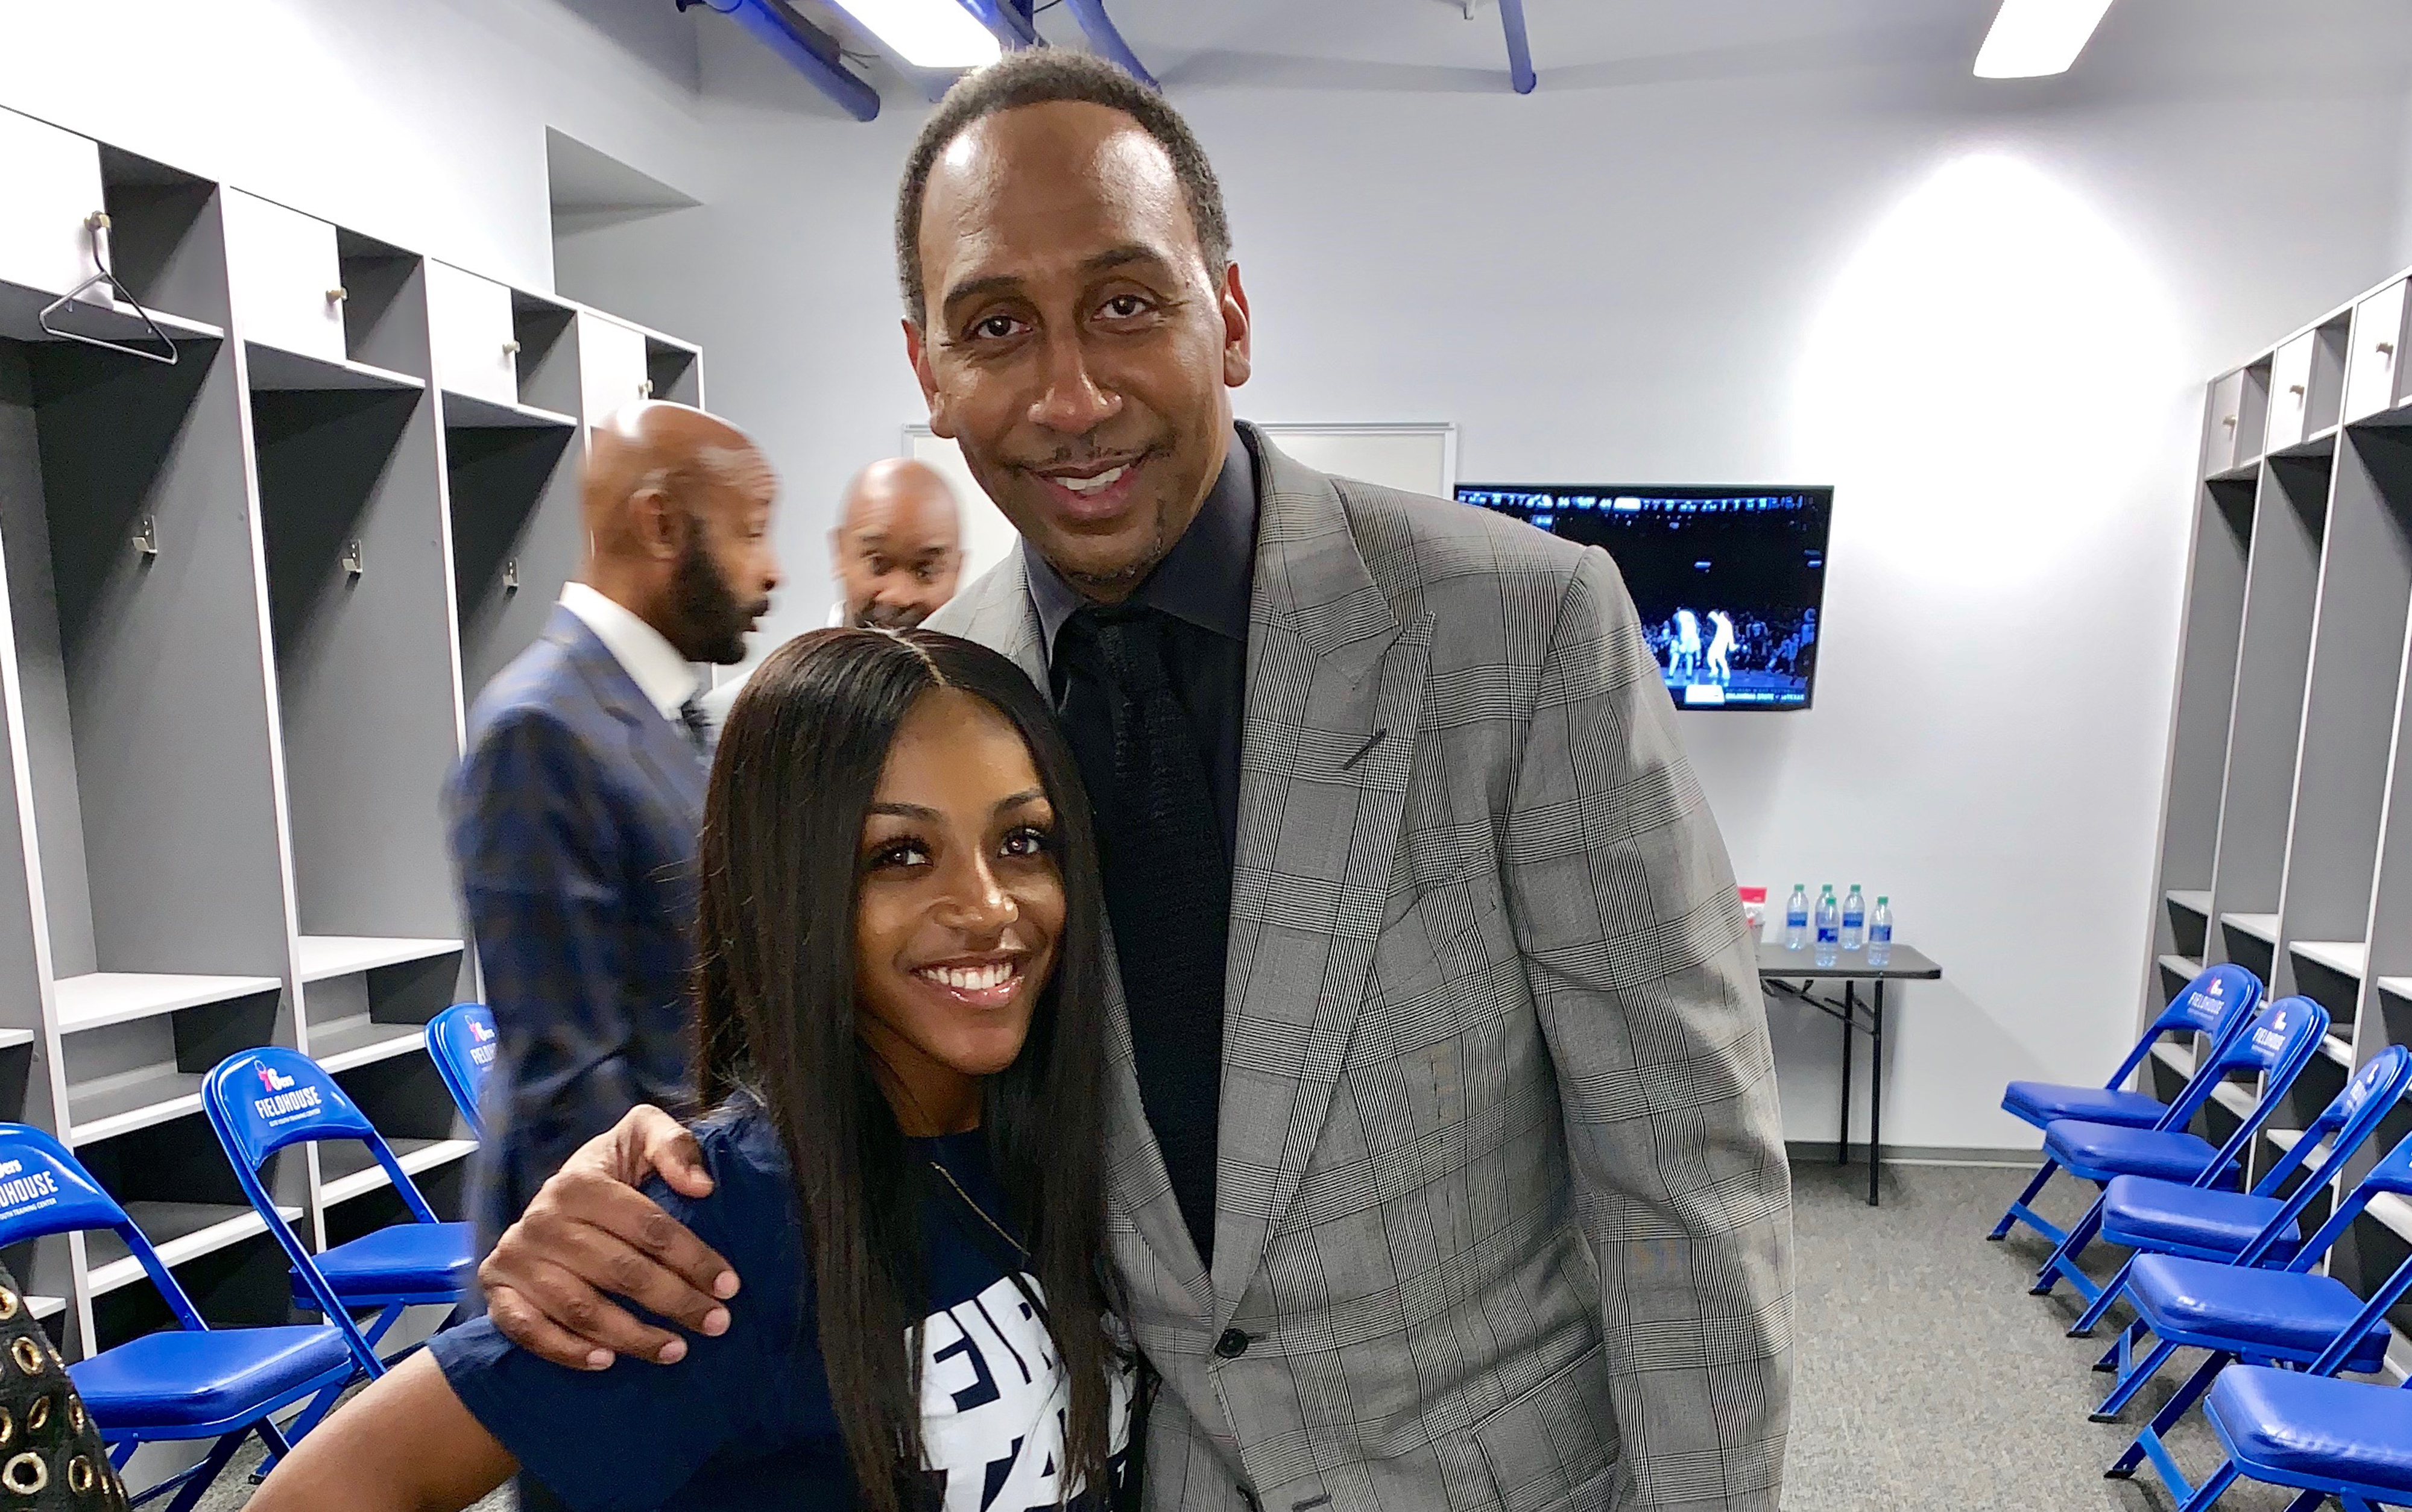 SGA Vice President Ashlee Davis gets a photo op with Stephen A. Smith, ESPN commentator, who broadcasted his morning show live at the 76er Fieldhouse as part of Wilmington's HBCU Week activities.